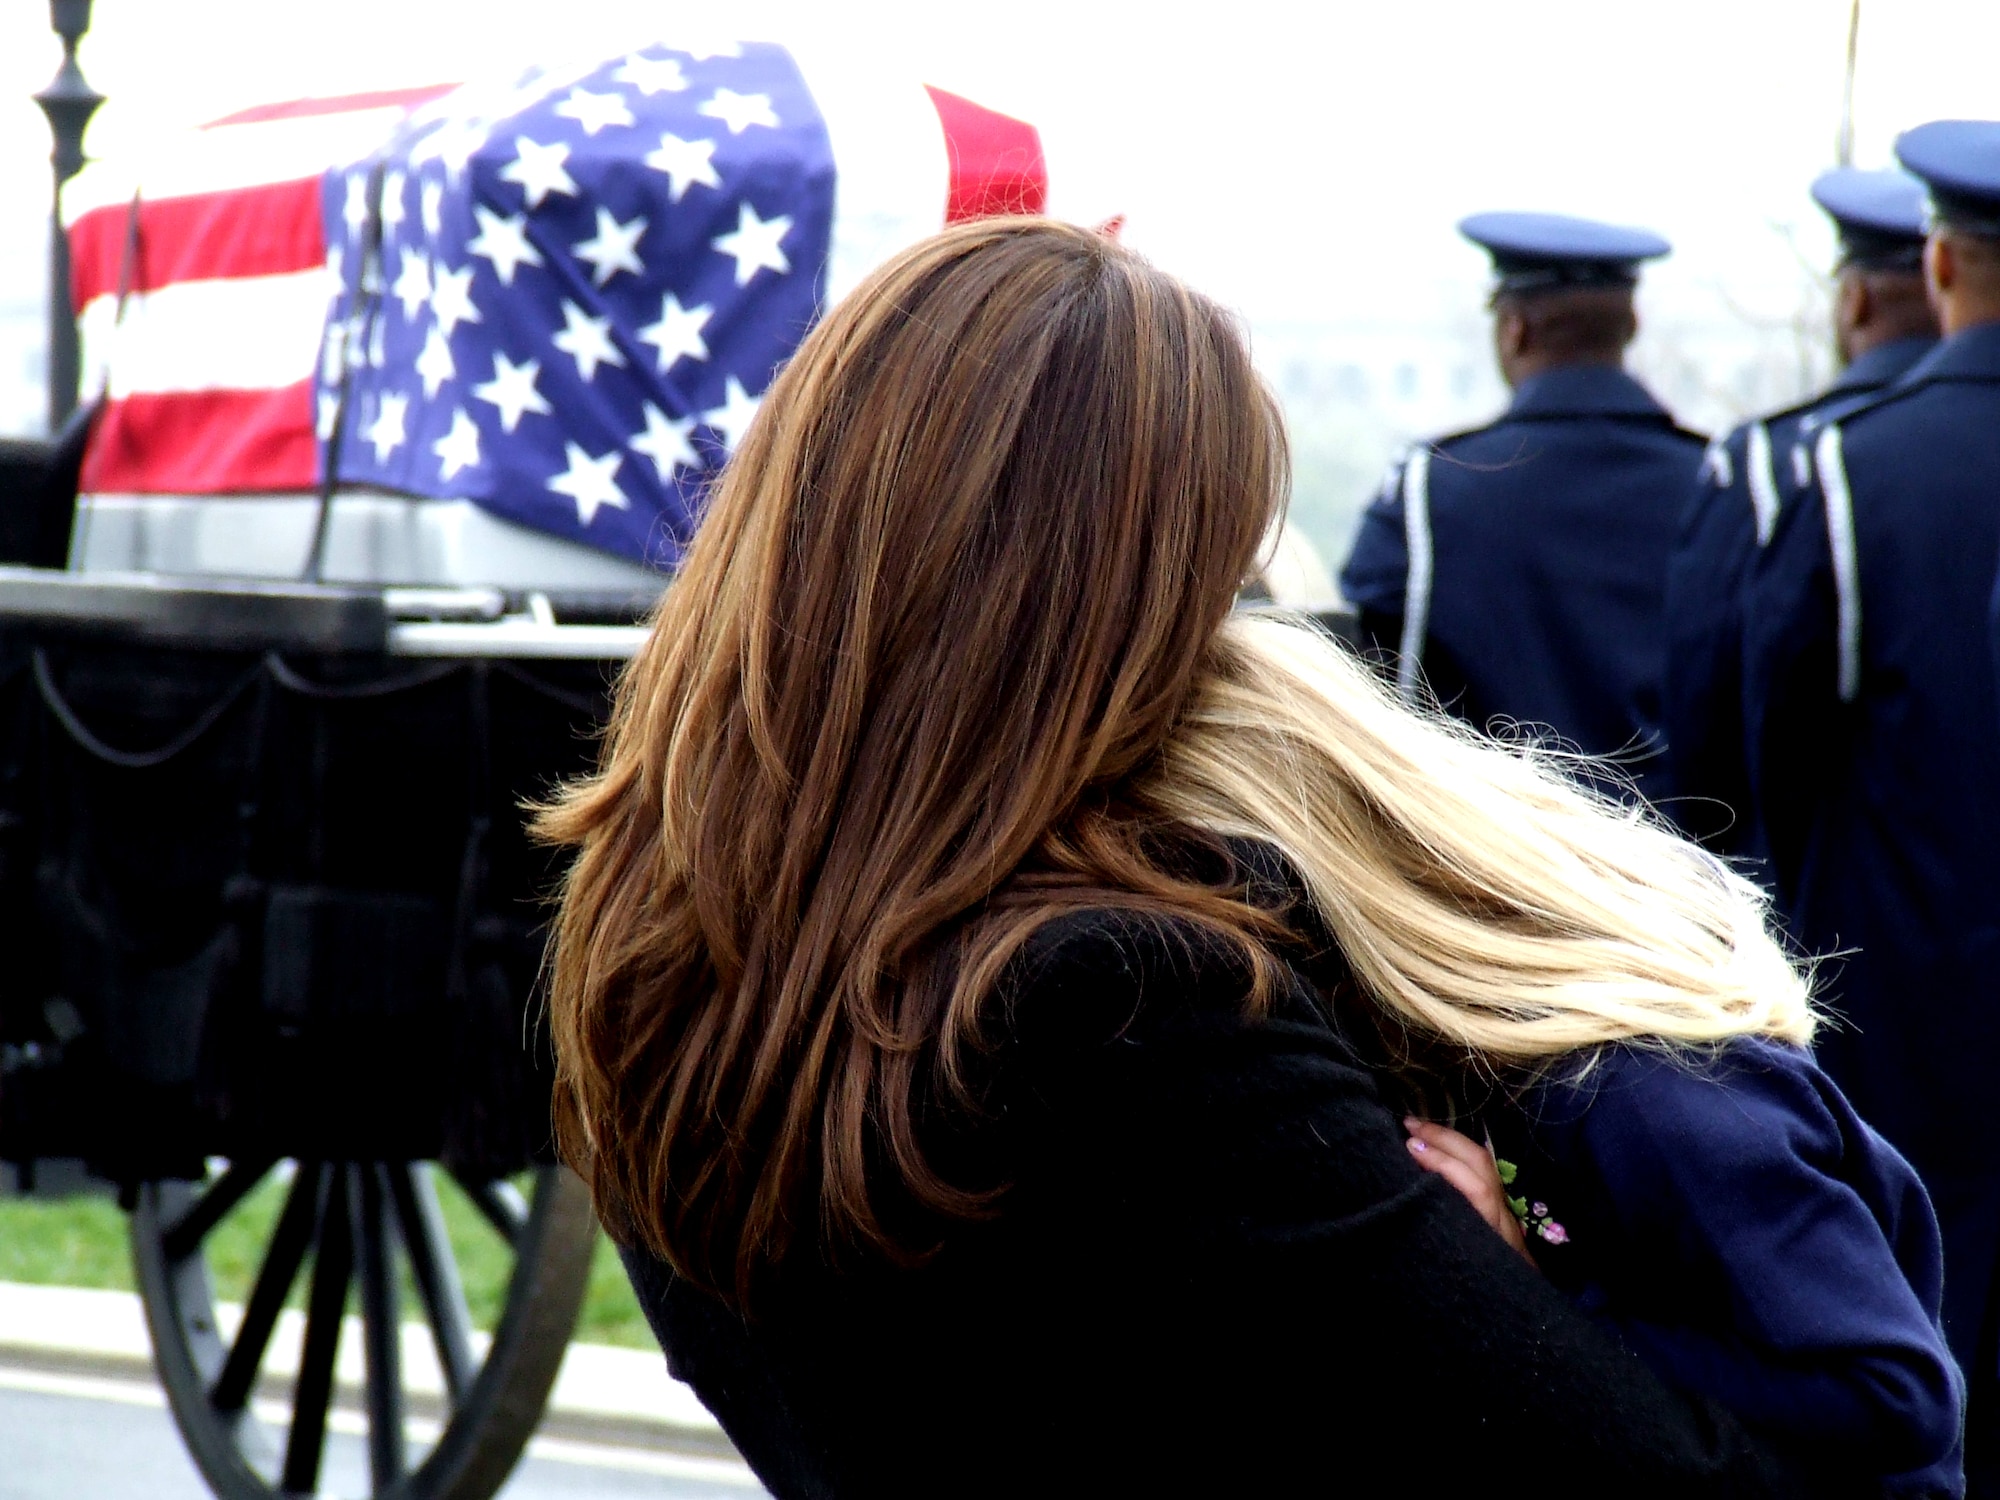 Family members of former missing in action Airman, Maj. Robert F. Woods, watch as the cason carrying him is prepared to move to a grave site April 9, 2008, at Arlington National Cemetery, Va.  On Nov. 30, 2007, the Air Force announced that Major Woods, along with co-pilot Capt. Johnnie C. Cornelius, were identified and their remains returned to the United States from Vietnam.  On June 26, 1968, Major Woods and Captain Cornelius were flying a visual reconaissance mission over Quang Binh Province, Vietnam, when their O-2A Skymaster aircraft crashed in a remote mountainous area.  Major Woods was buried with full military honors nearly 40 years after he disappeared in the crash.  (U.S. Air Force Photo/Tech. Sgt. Scott T. Sturkol)